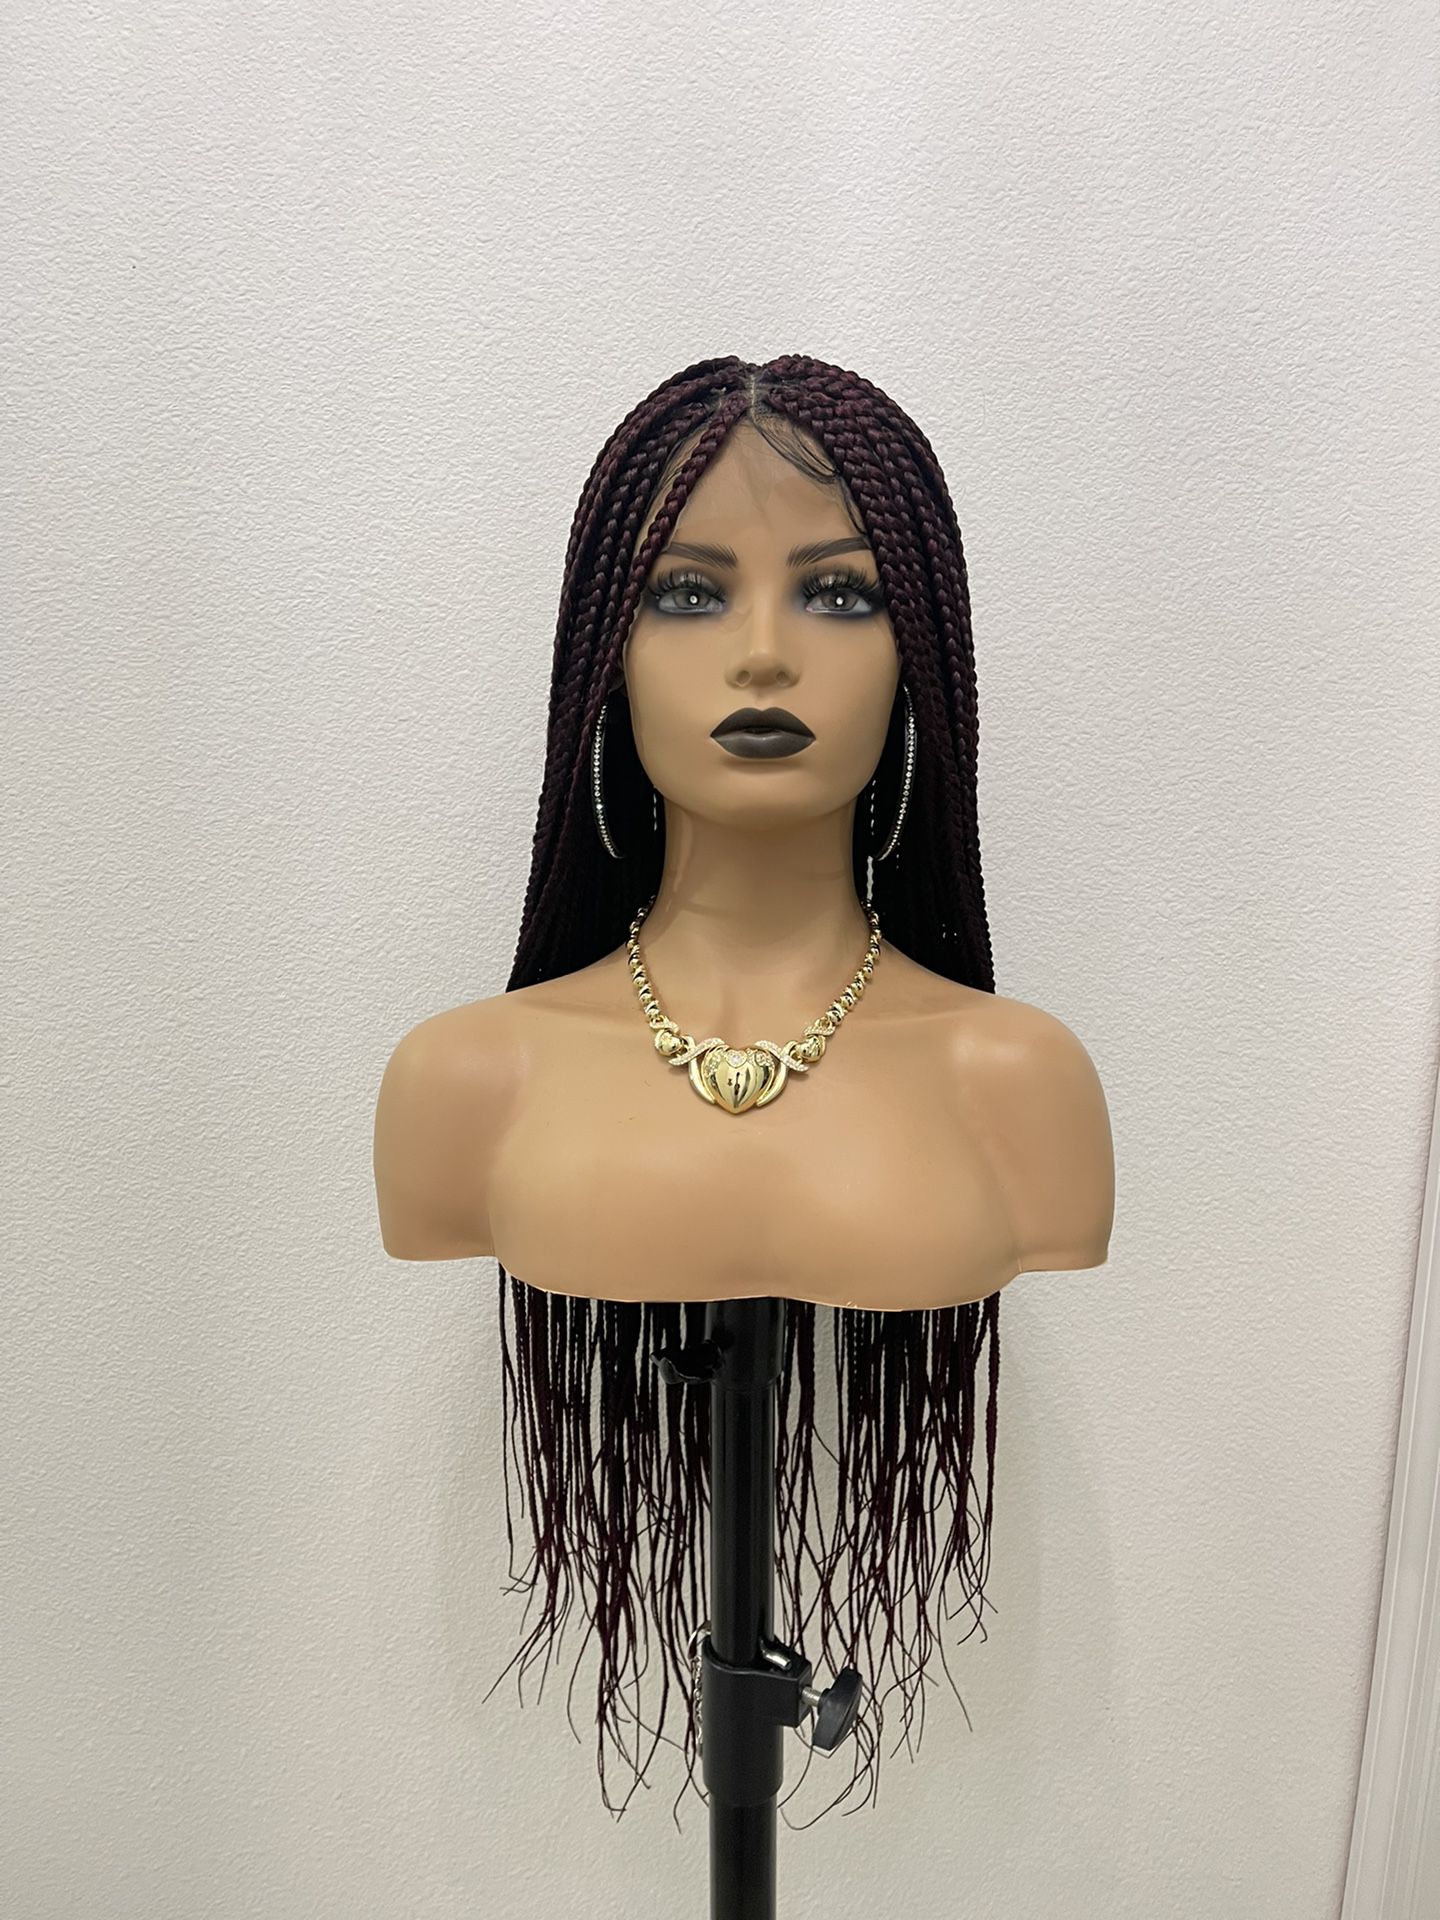 New! 36” Full Lace, Silk Base, 1B/99j Synthetic Braided Wig can be worn Glueless has combs and adjustable strap with extra band for better fit The ent